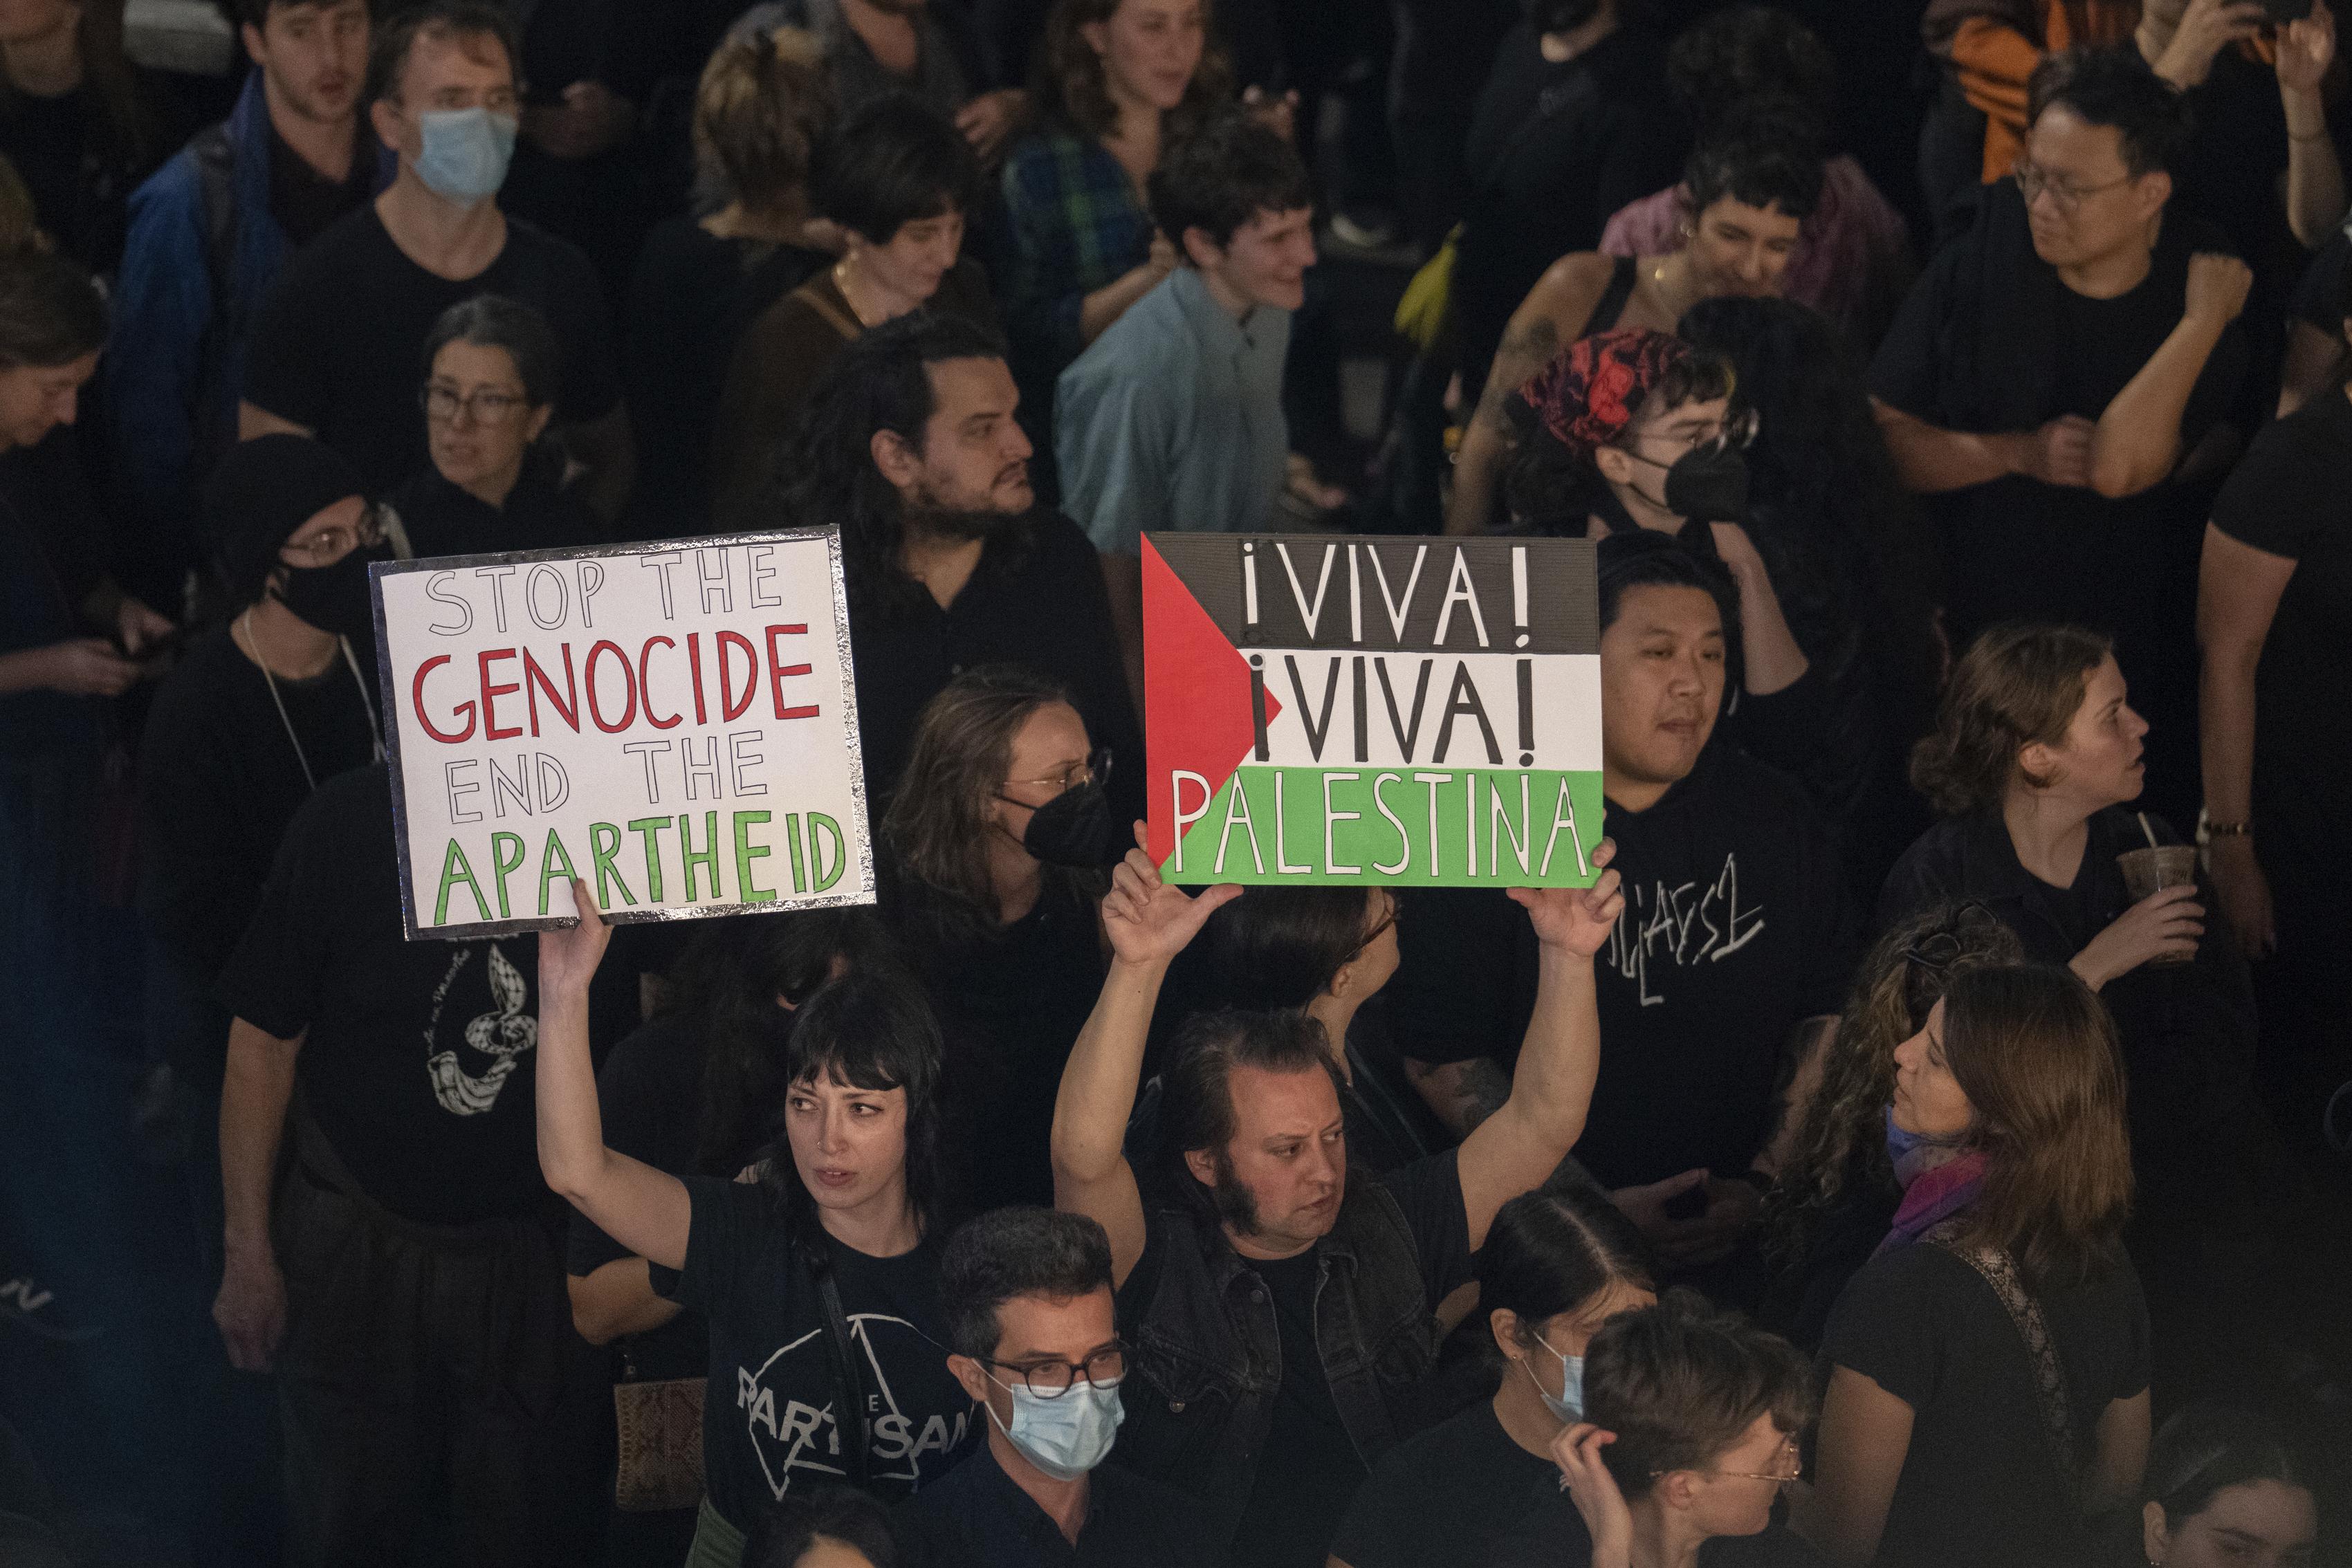 Pro-Palestinian protesters call for ceasefire at Grand Central